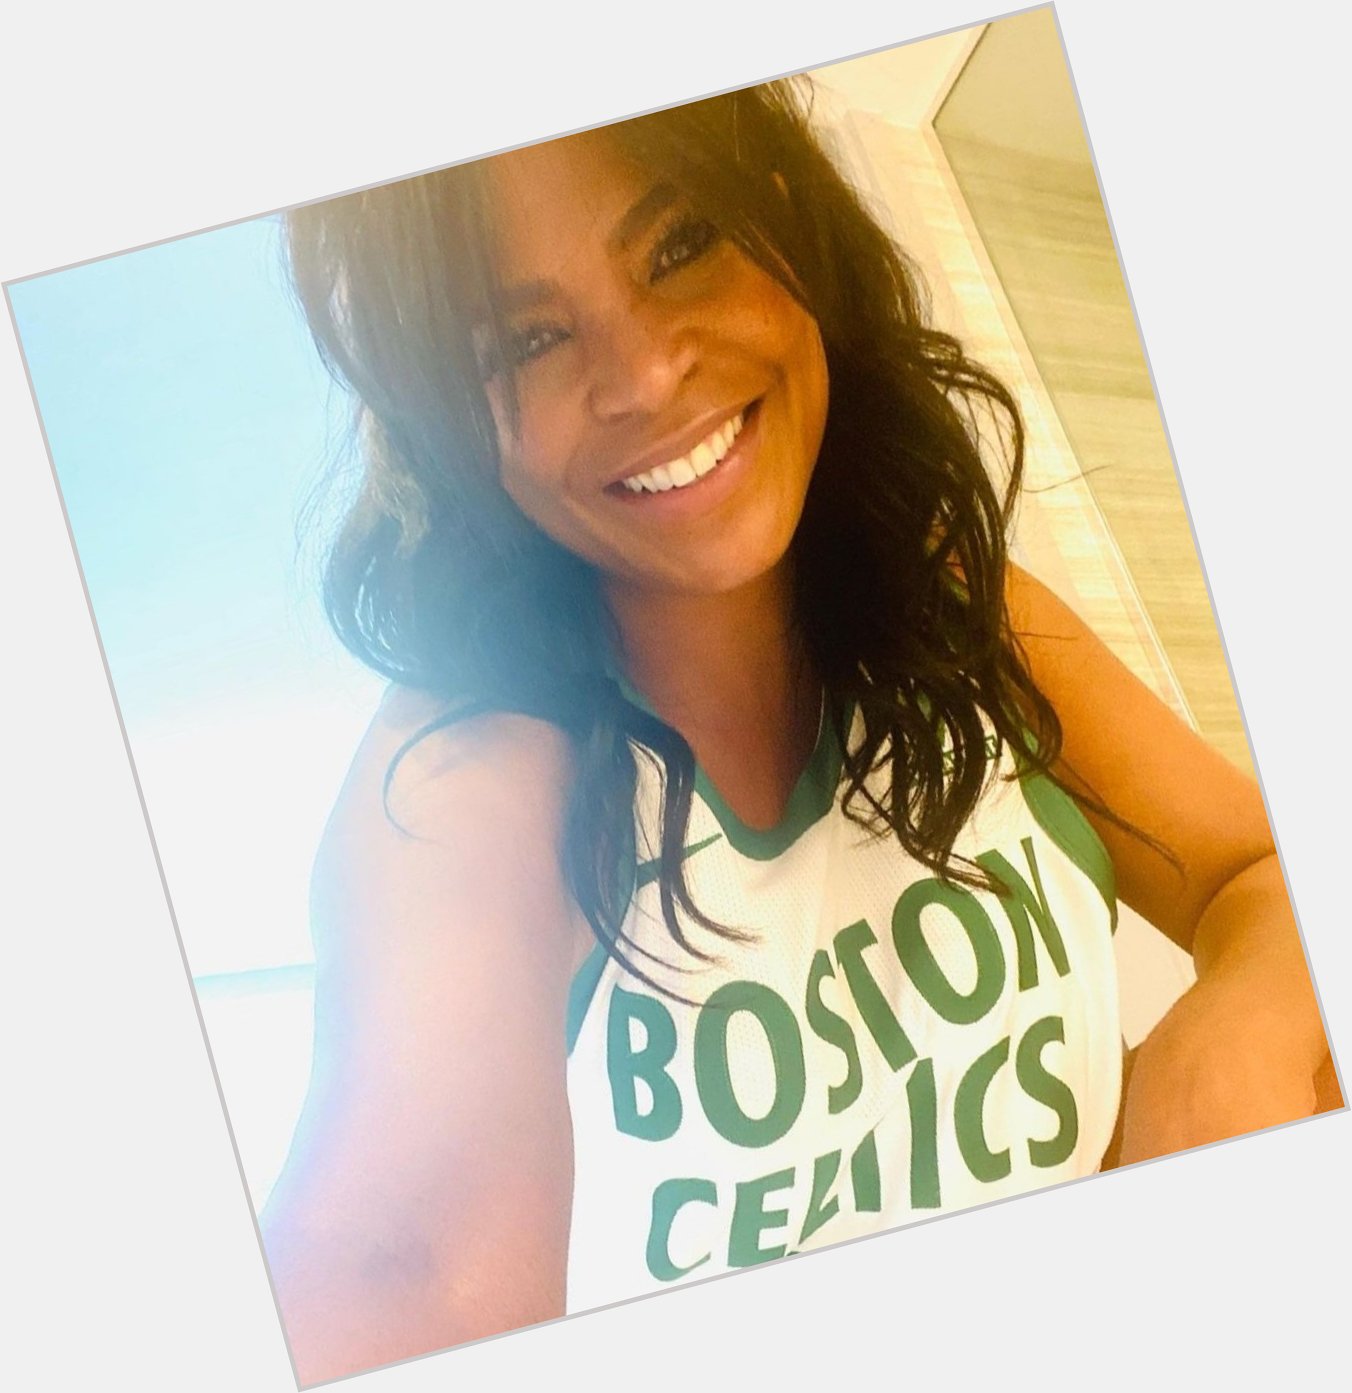 Happy birthday to the First Lady of the Celtics, Nia Long 